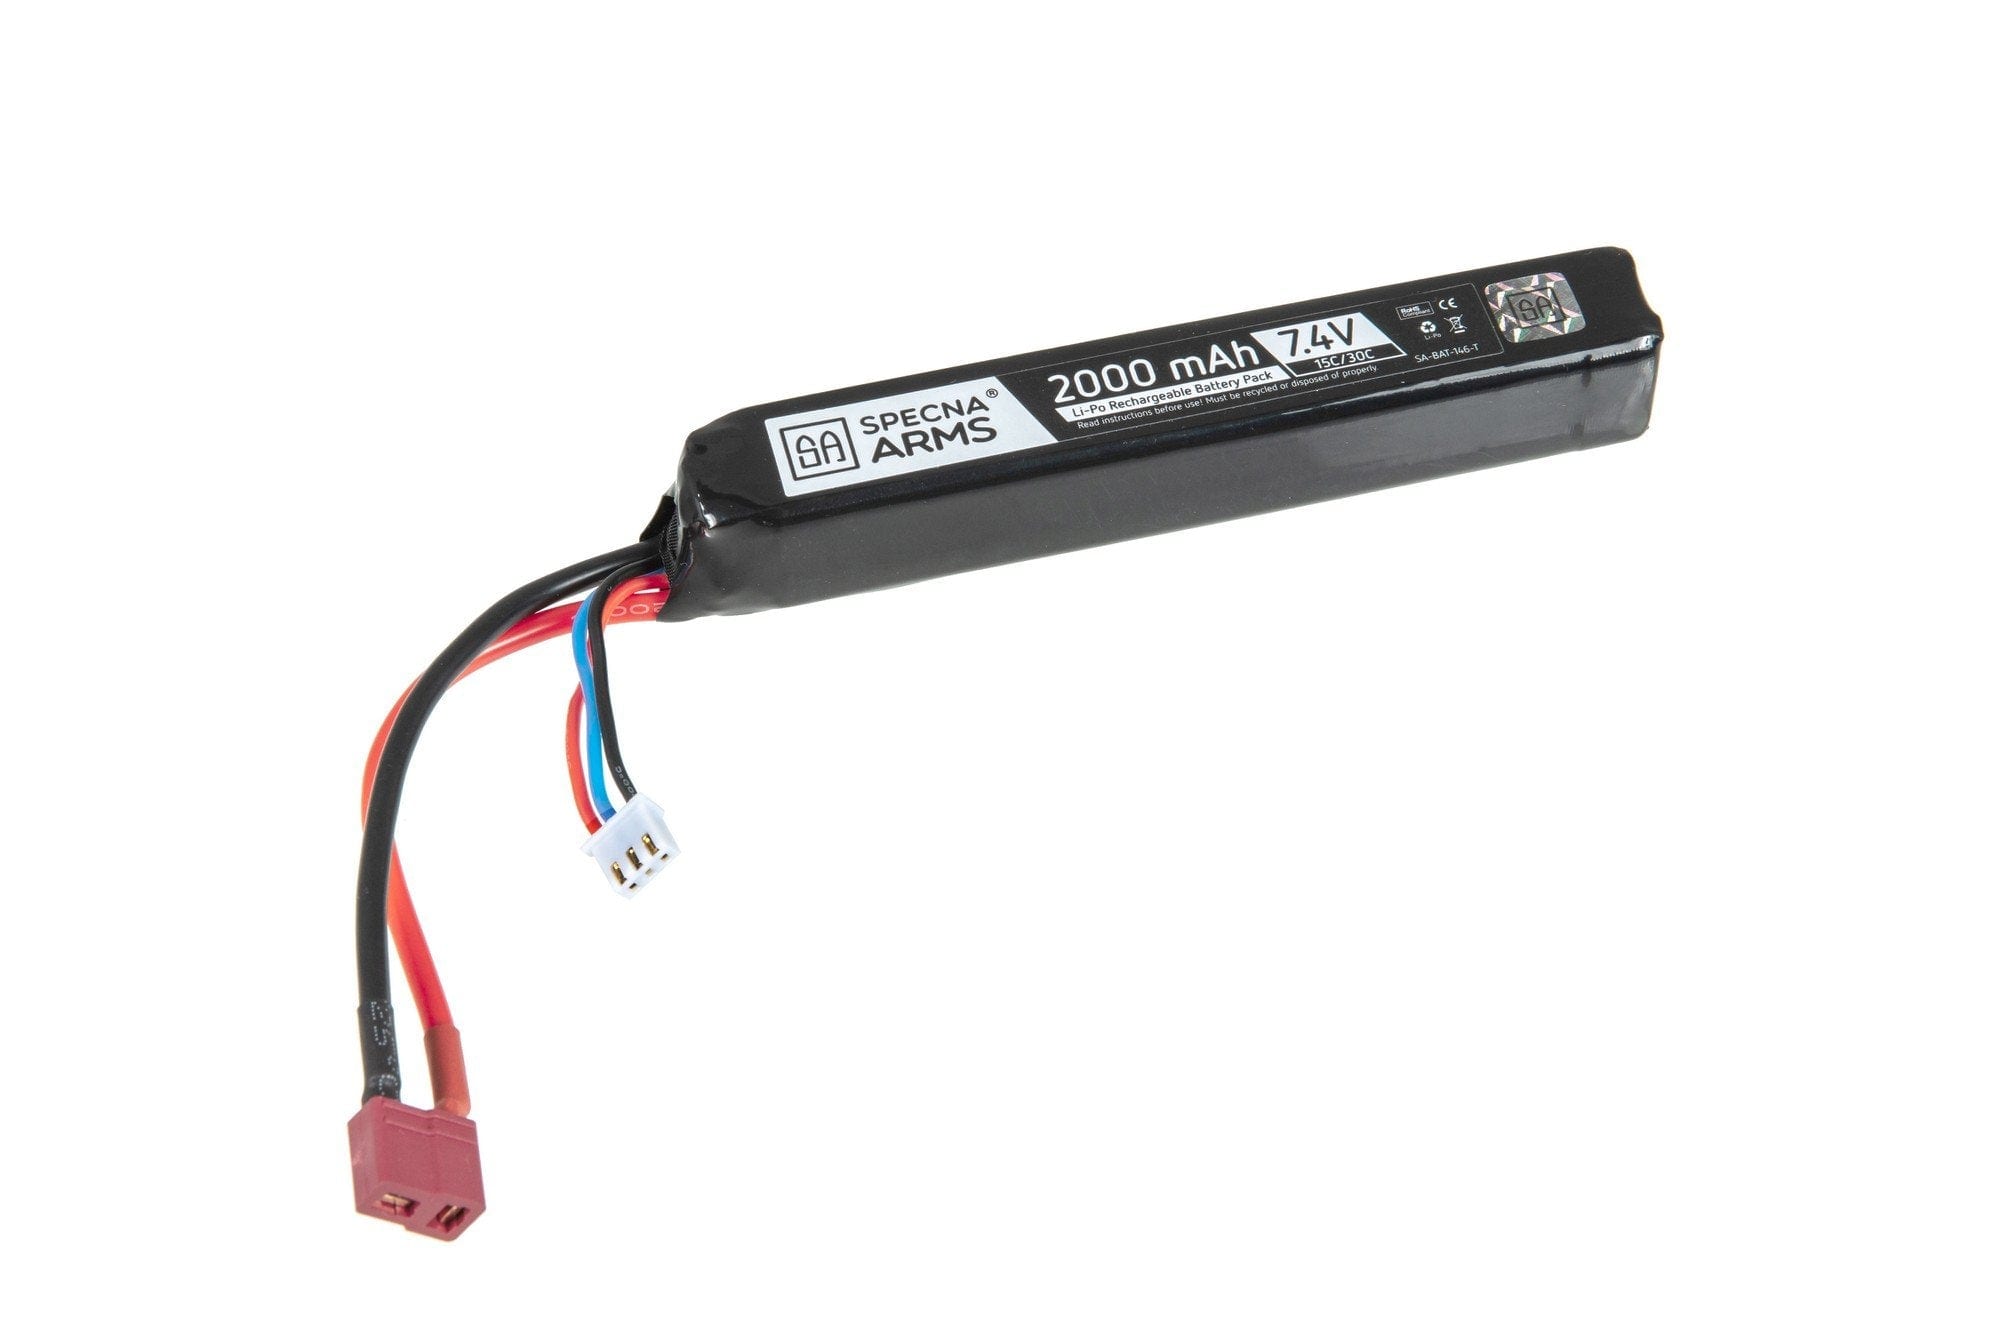 LiPo 7.4V 2000mAh 15 / 30C Battery - T-Connect (Deans) by Specna Arms on Airsoft Mania Europe